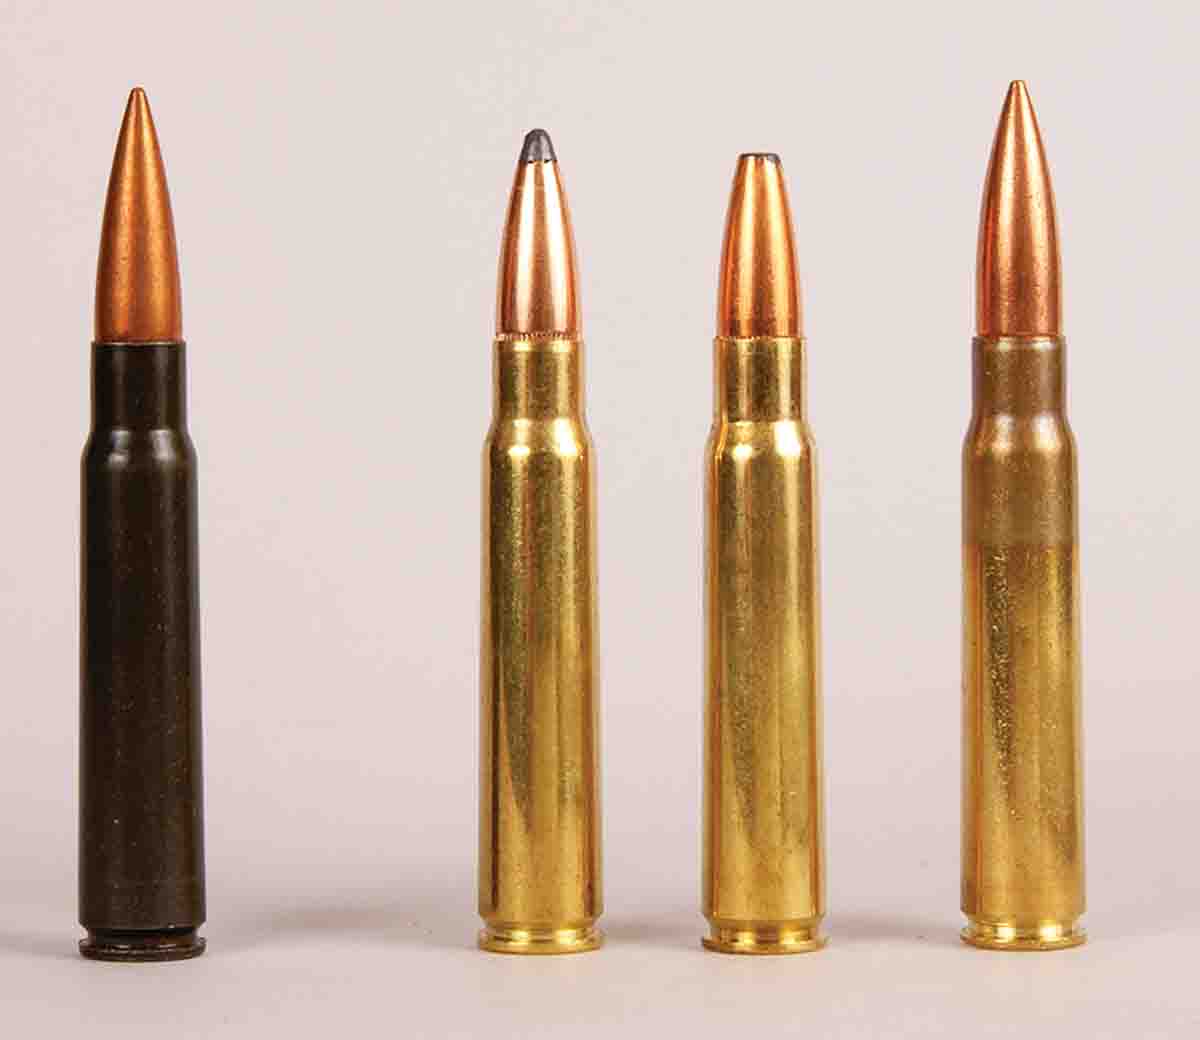 These cartridges include (left to right): an original German military round, a Hornady 195-grain Spire Point factory load, a Norma 196-grain softpoint factory load and a Mitchell’s Mausers 198-grain FMJ factory load.